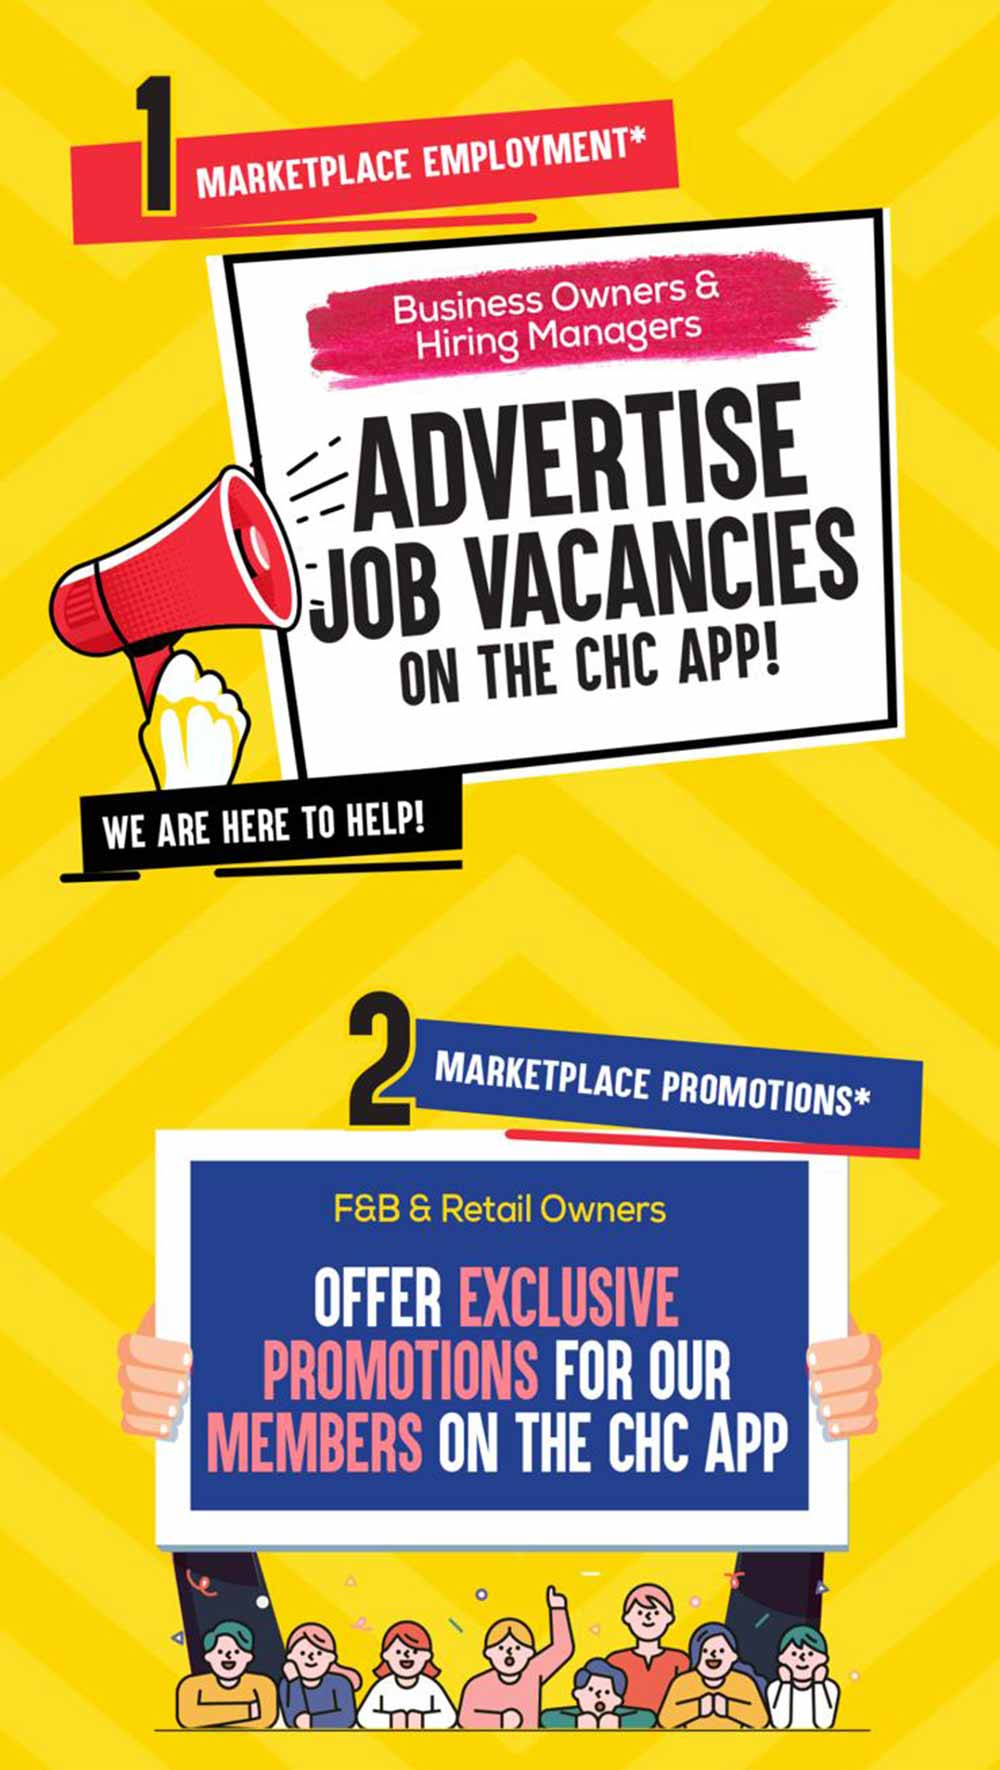 Marketplace Employments & Promotions